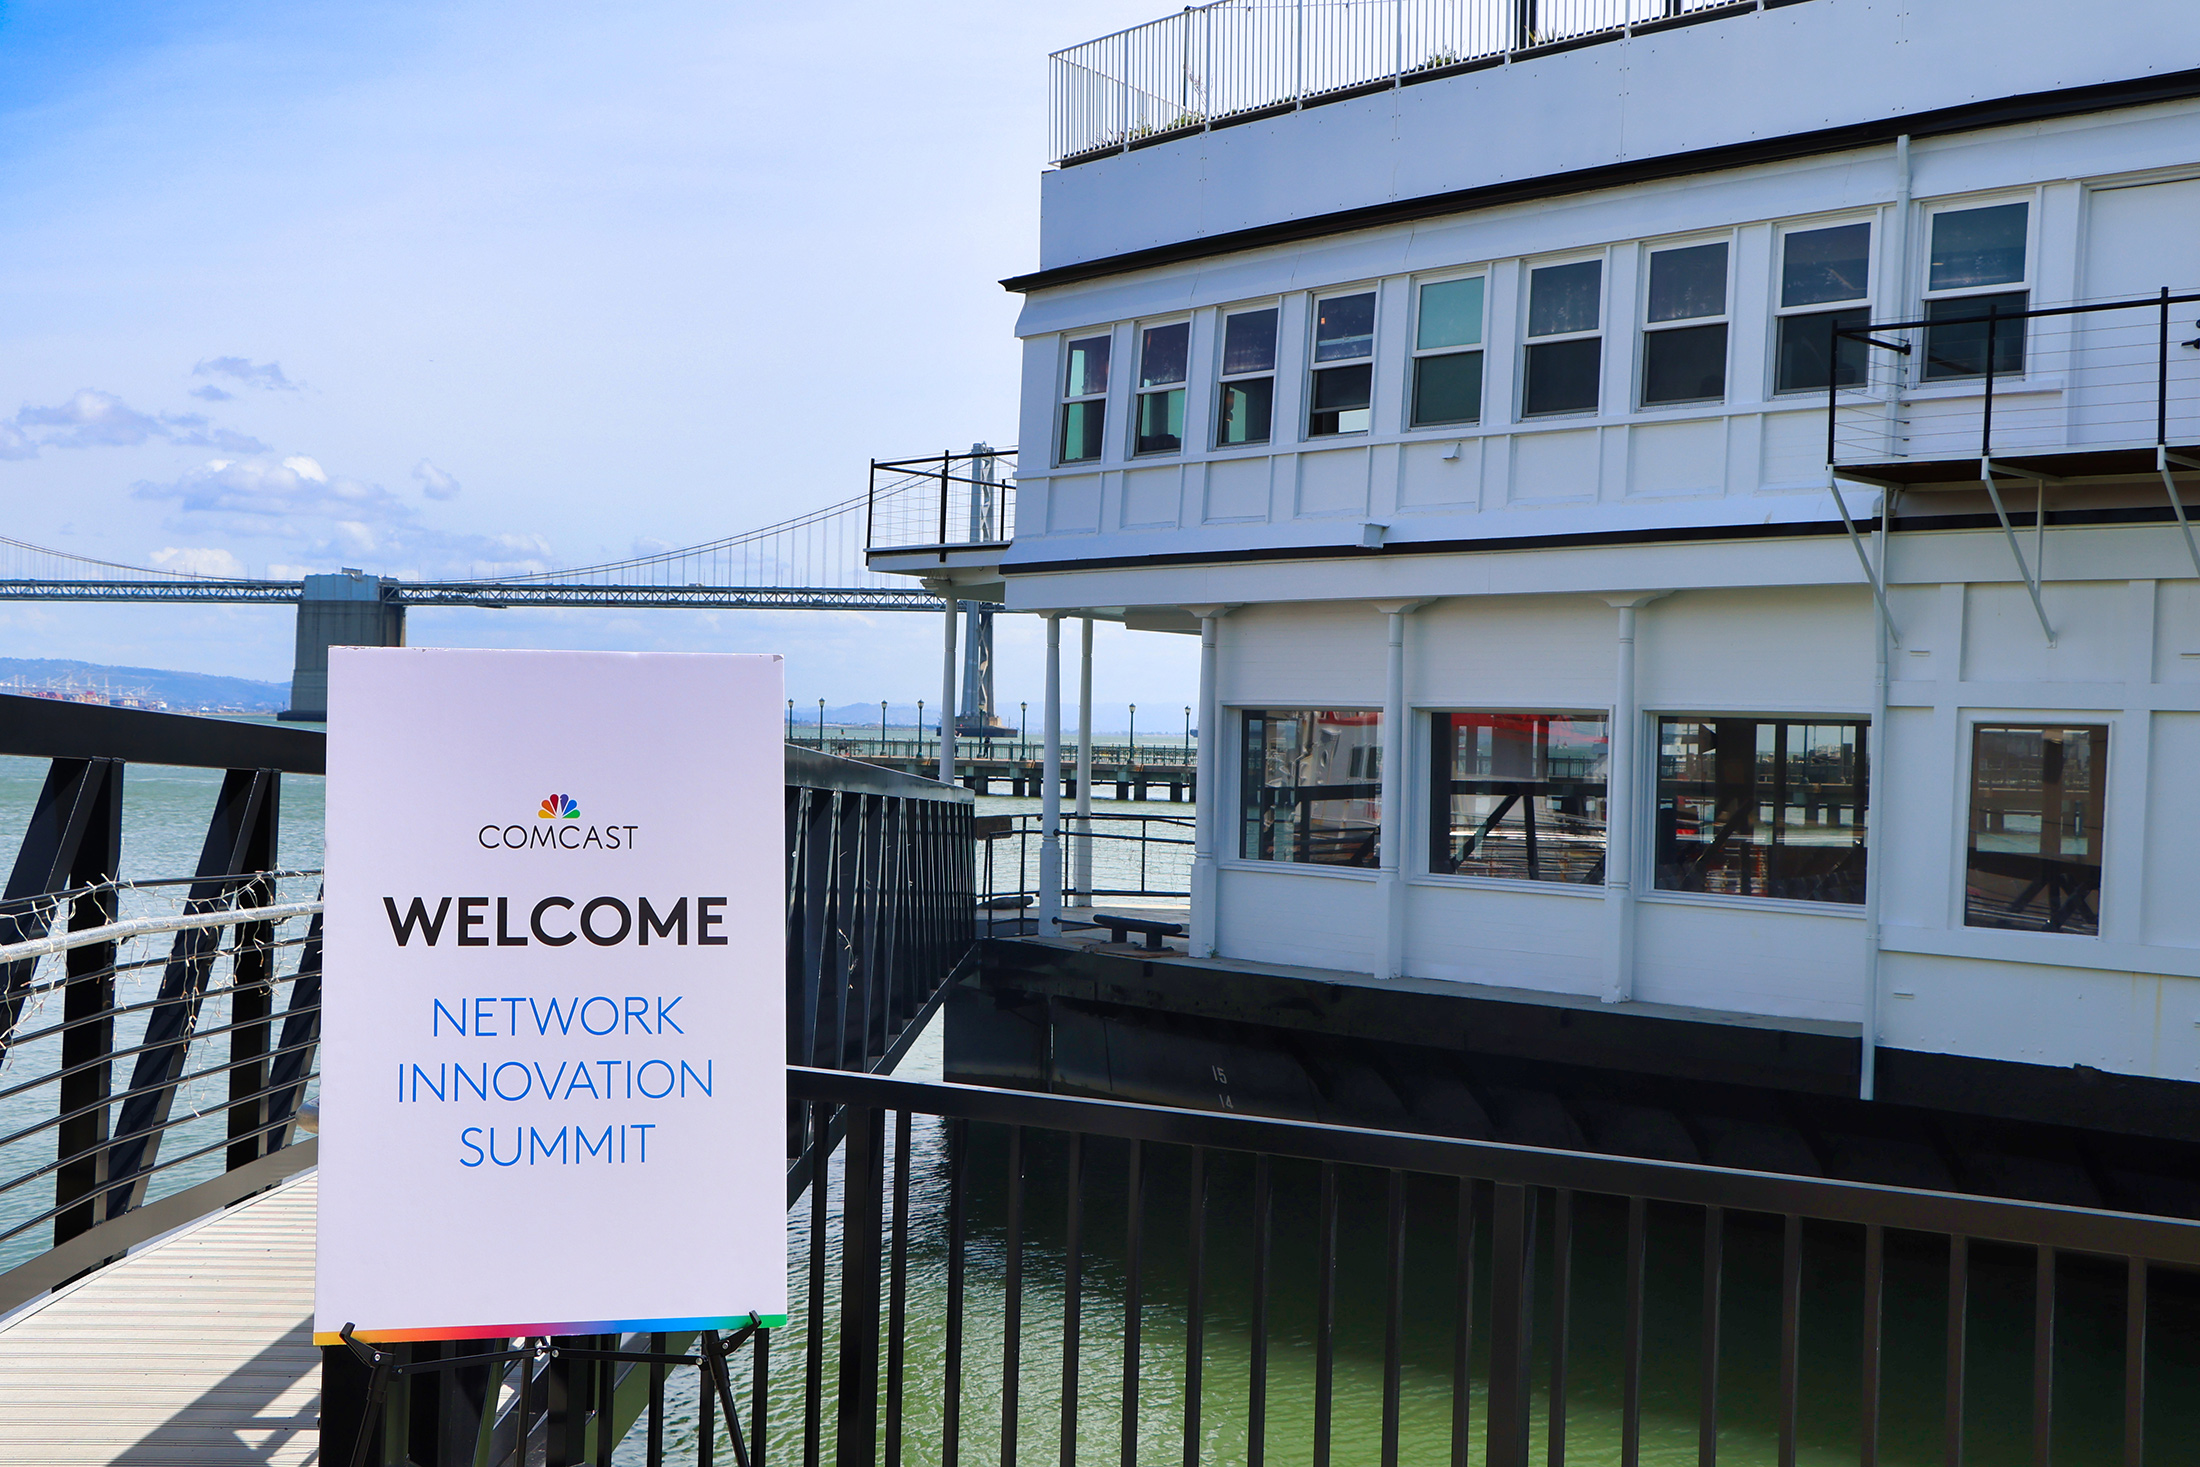 Welcome sign at the entrance to the Comcast Innovation Summit